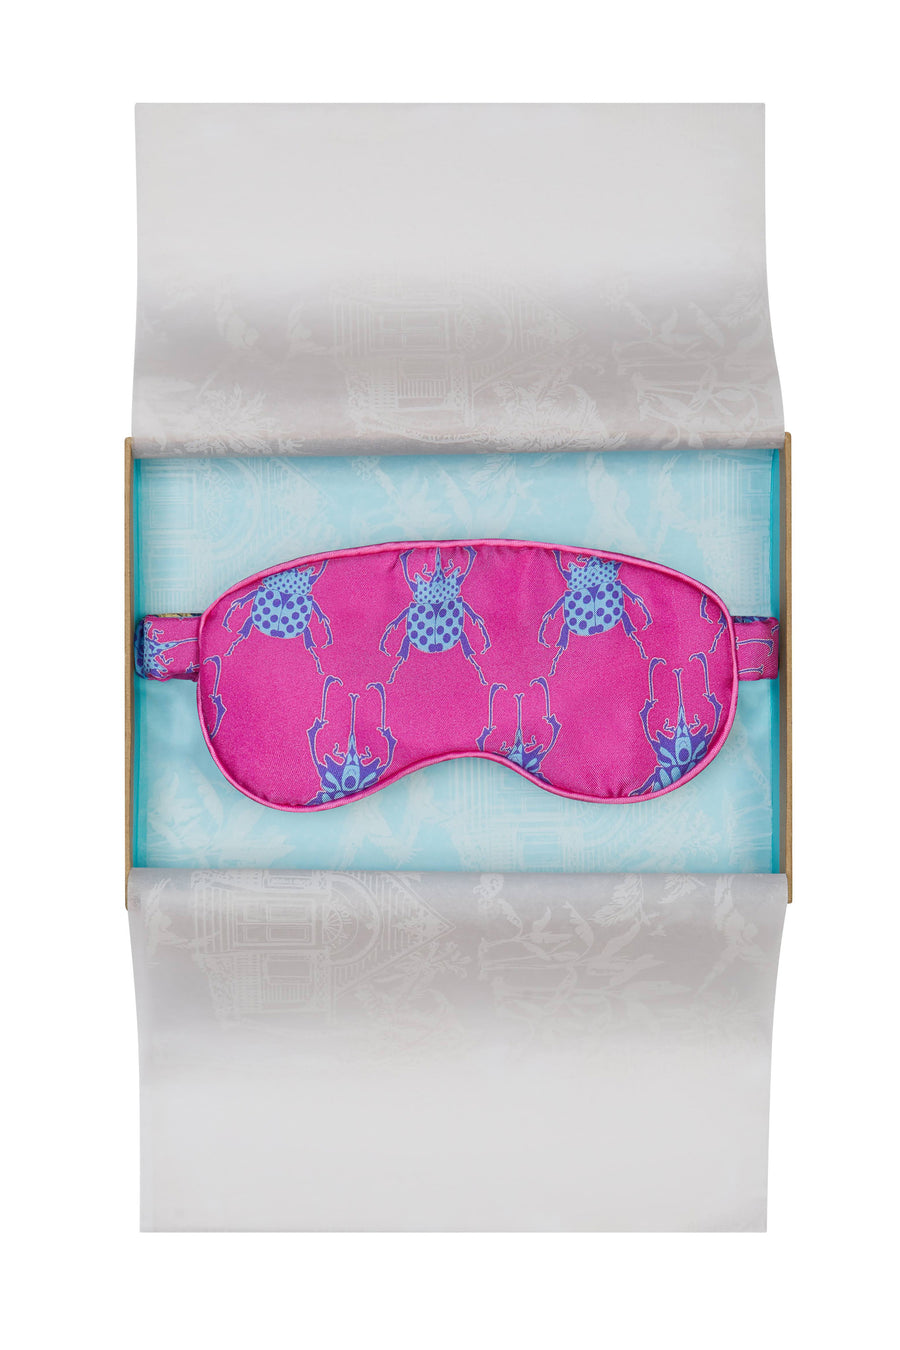 Limited edition pure silk eye mask in bright pink and blue Beetle print by Lotty B Mustique. Handmade in England